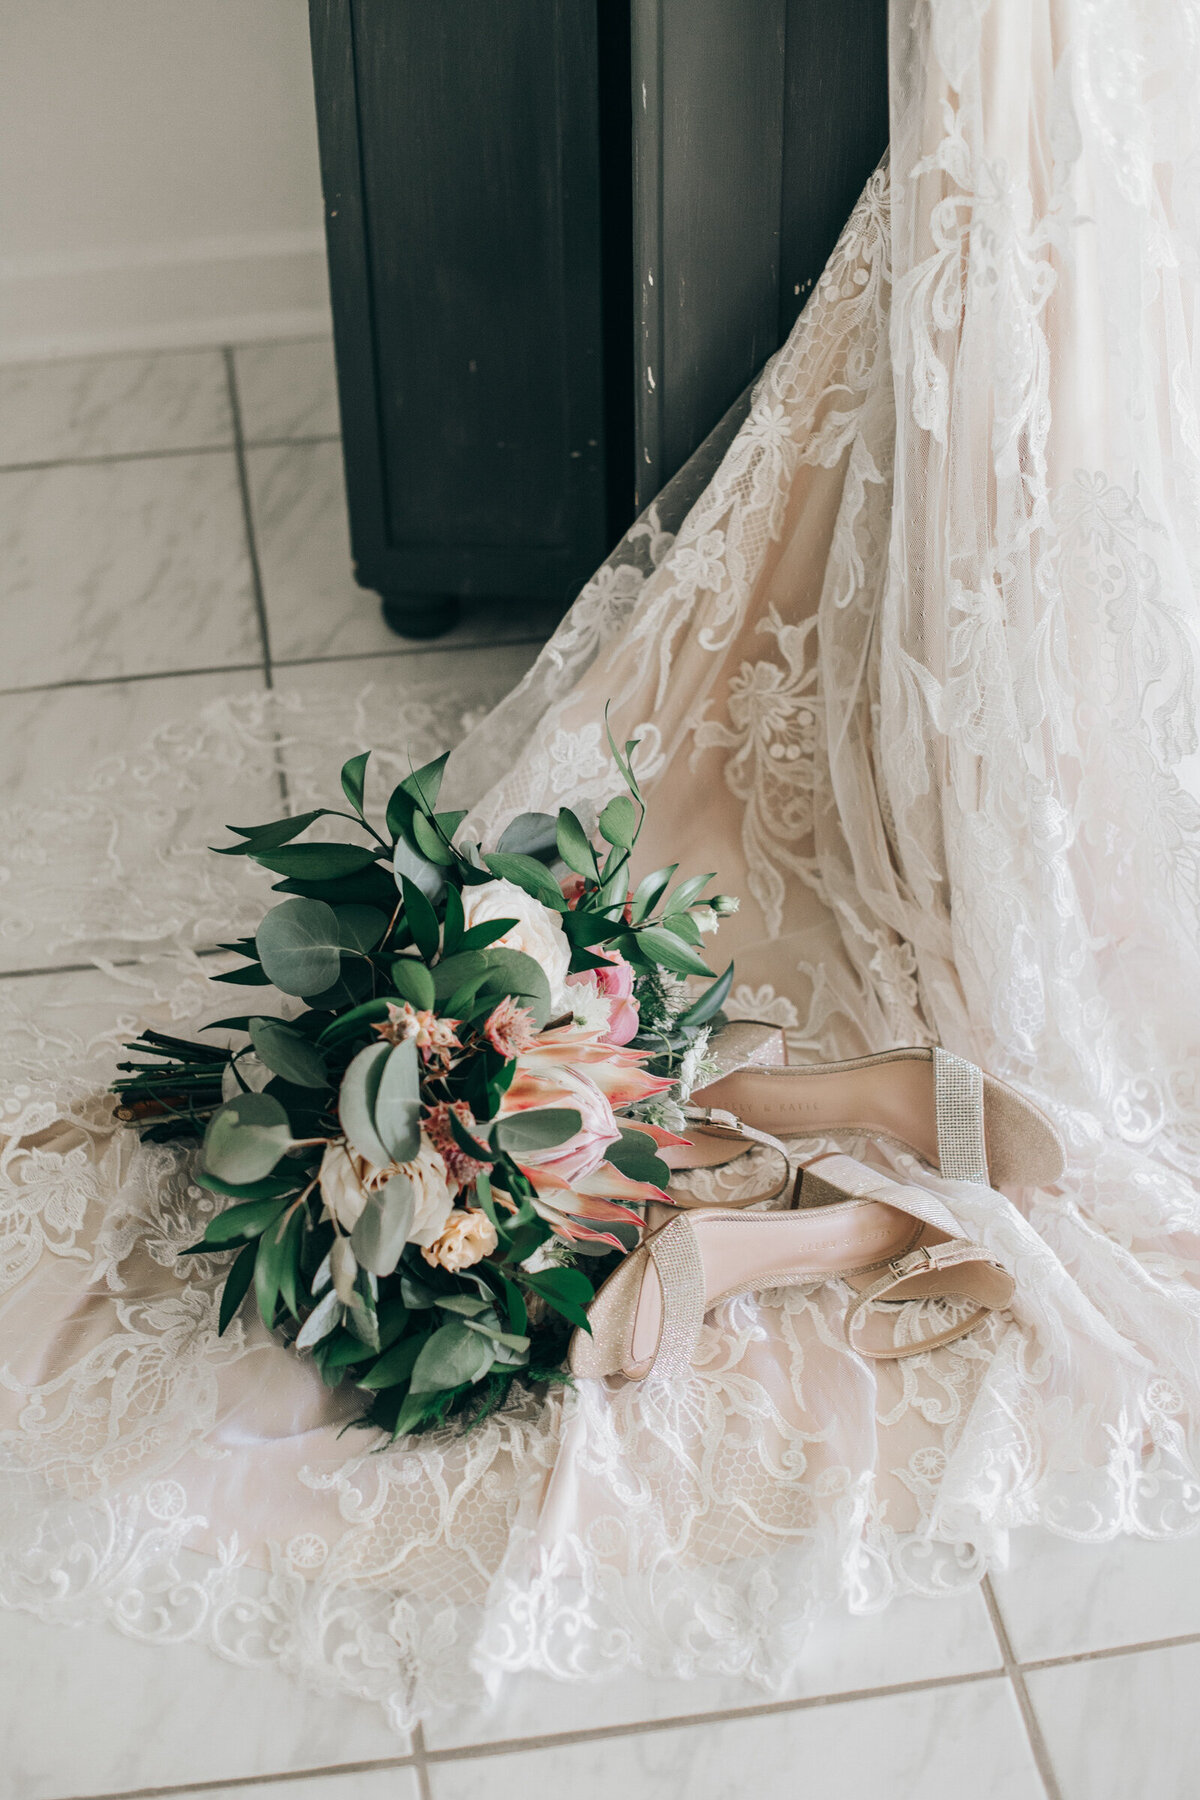 A bride's whimsical wedding bouquet and her diamond wedding shoes